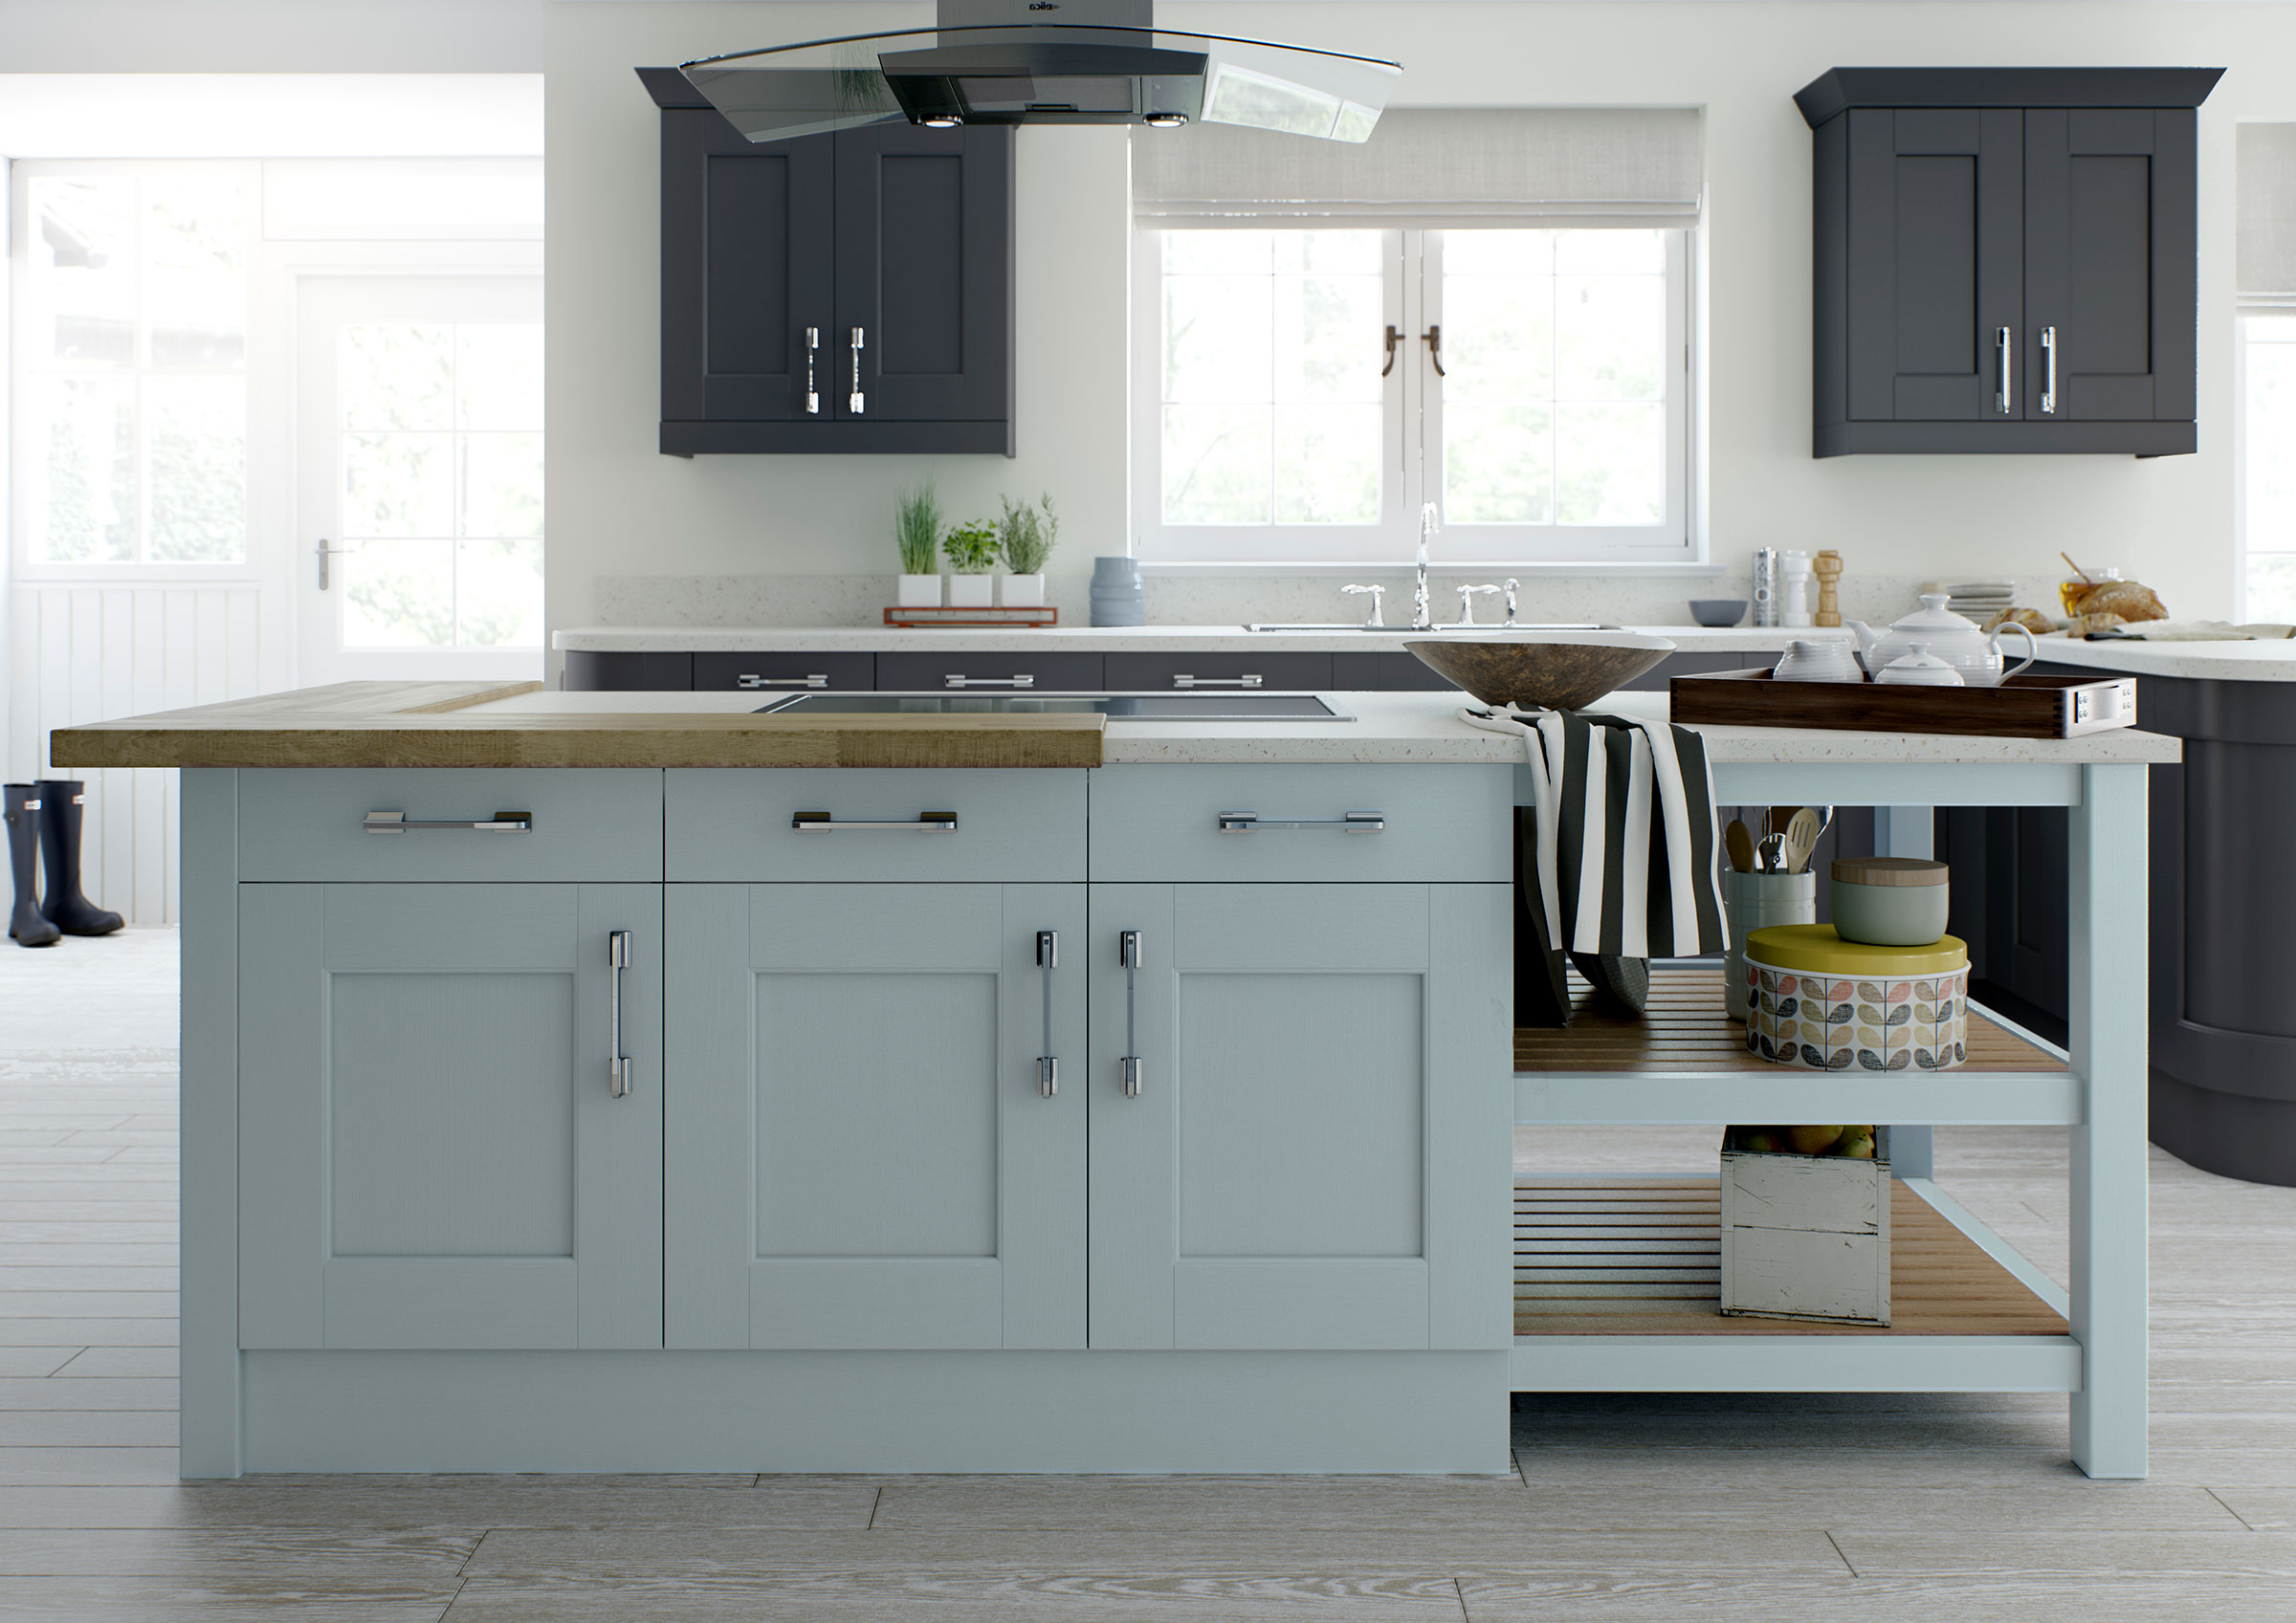 Contemporary shaker kitchen painted in mineral blue and slate grey with quartz and wood worktops